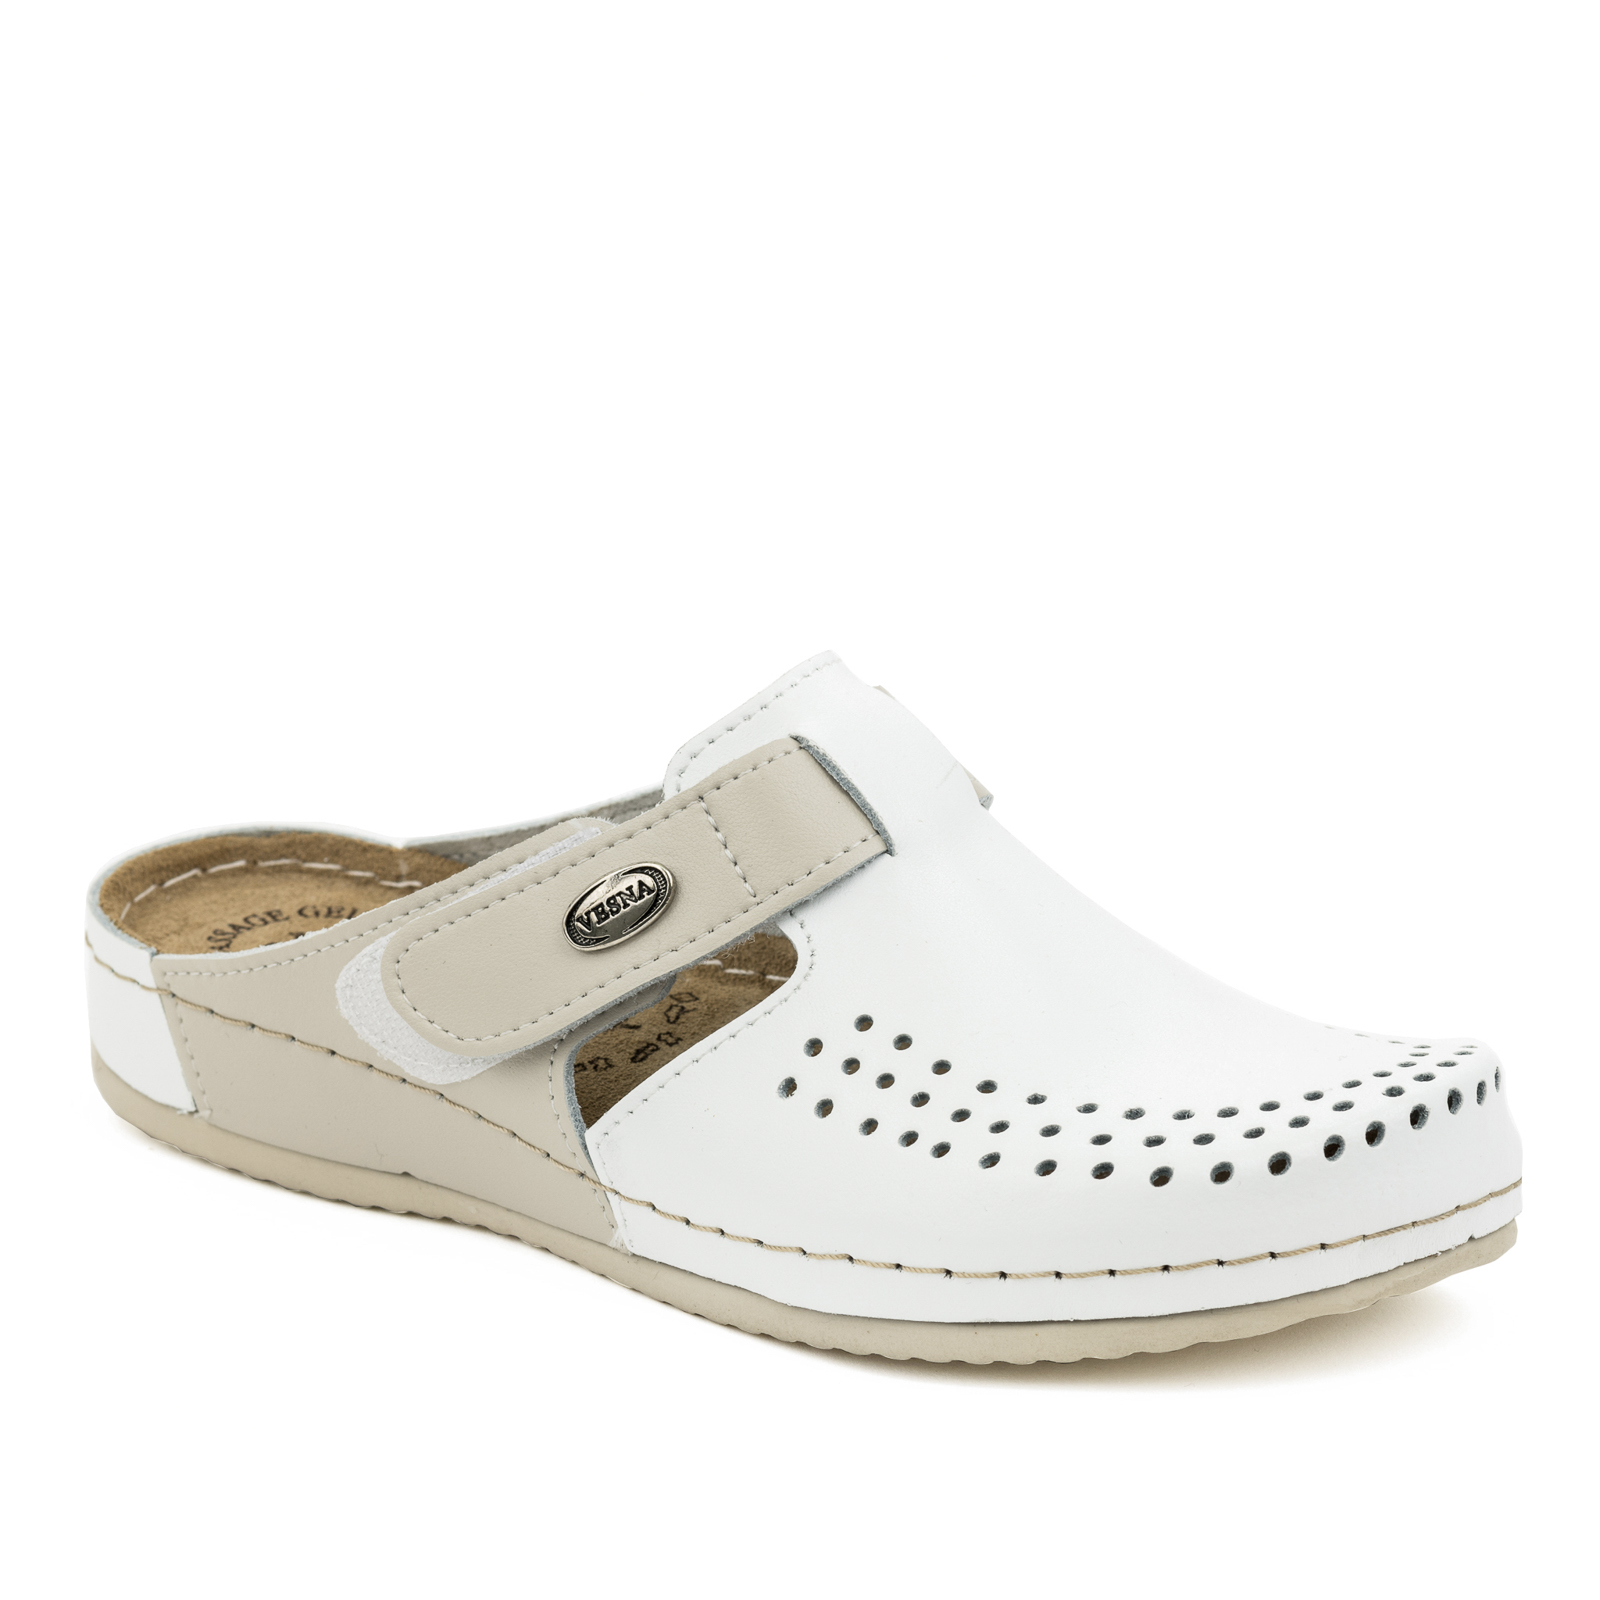 ANATOMIC LEATHER  CLOGS WITH VELCRO BAND - BEIGE/WHITE